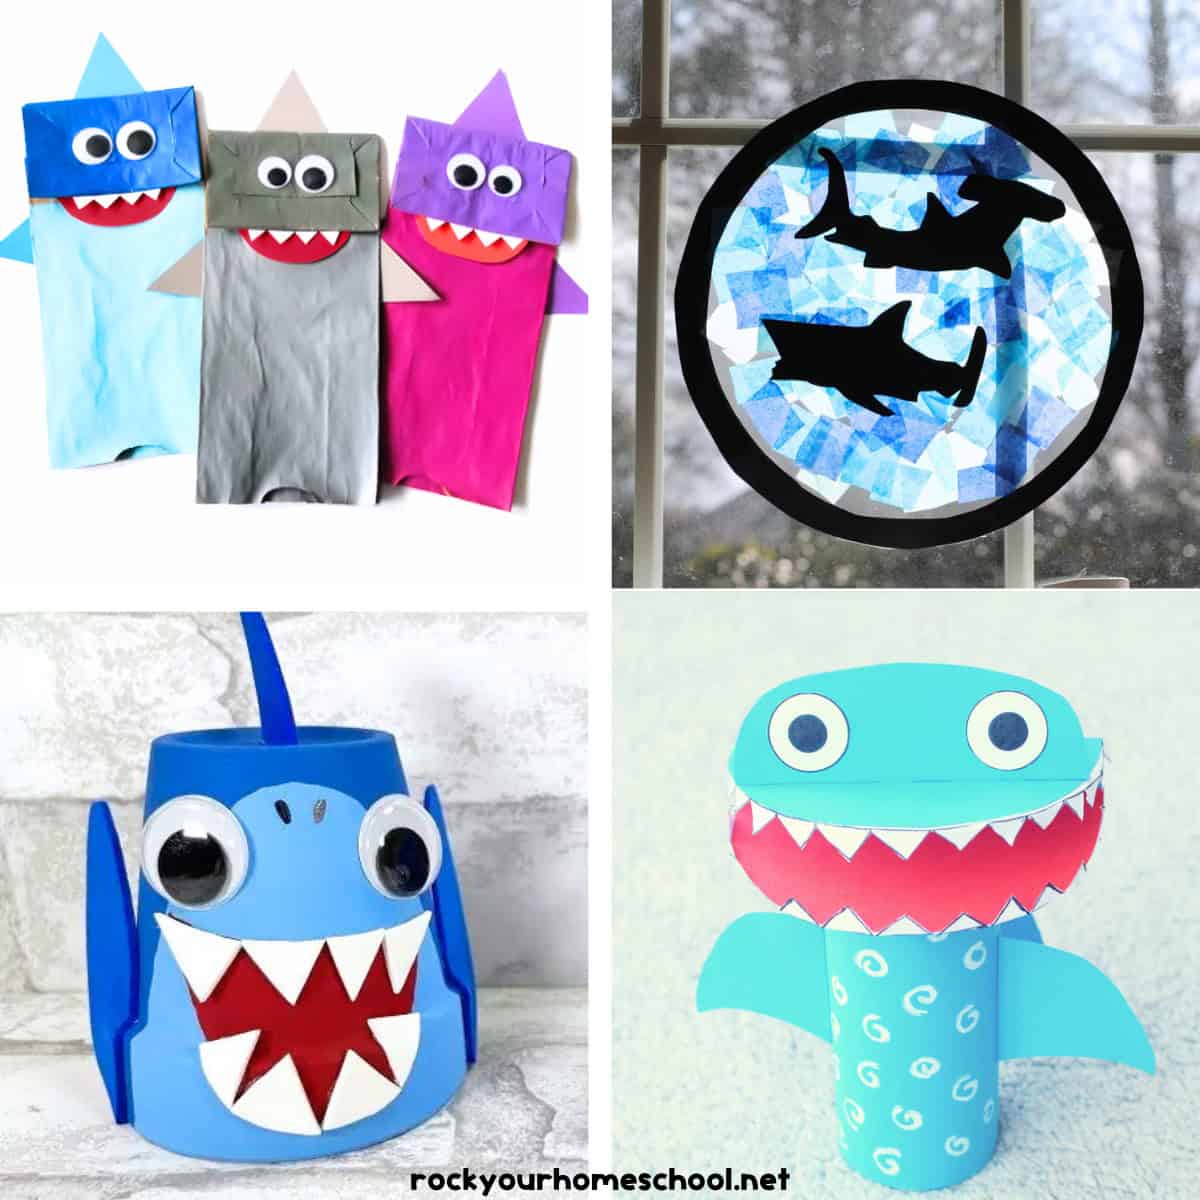 Four examples of shark crafts for kids including paper bag puppets, tissue paper silhouette, clay pot, and toilet paper roll crafts.